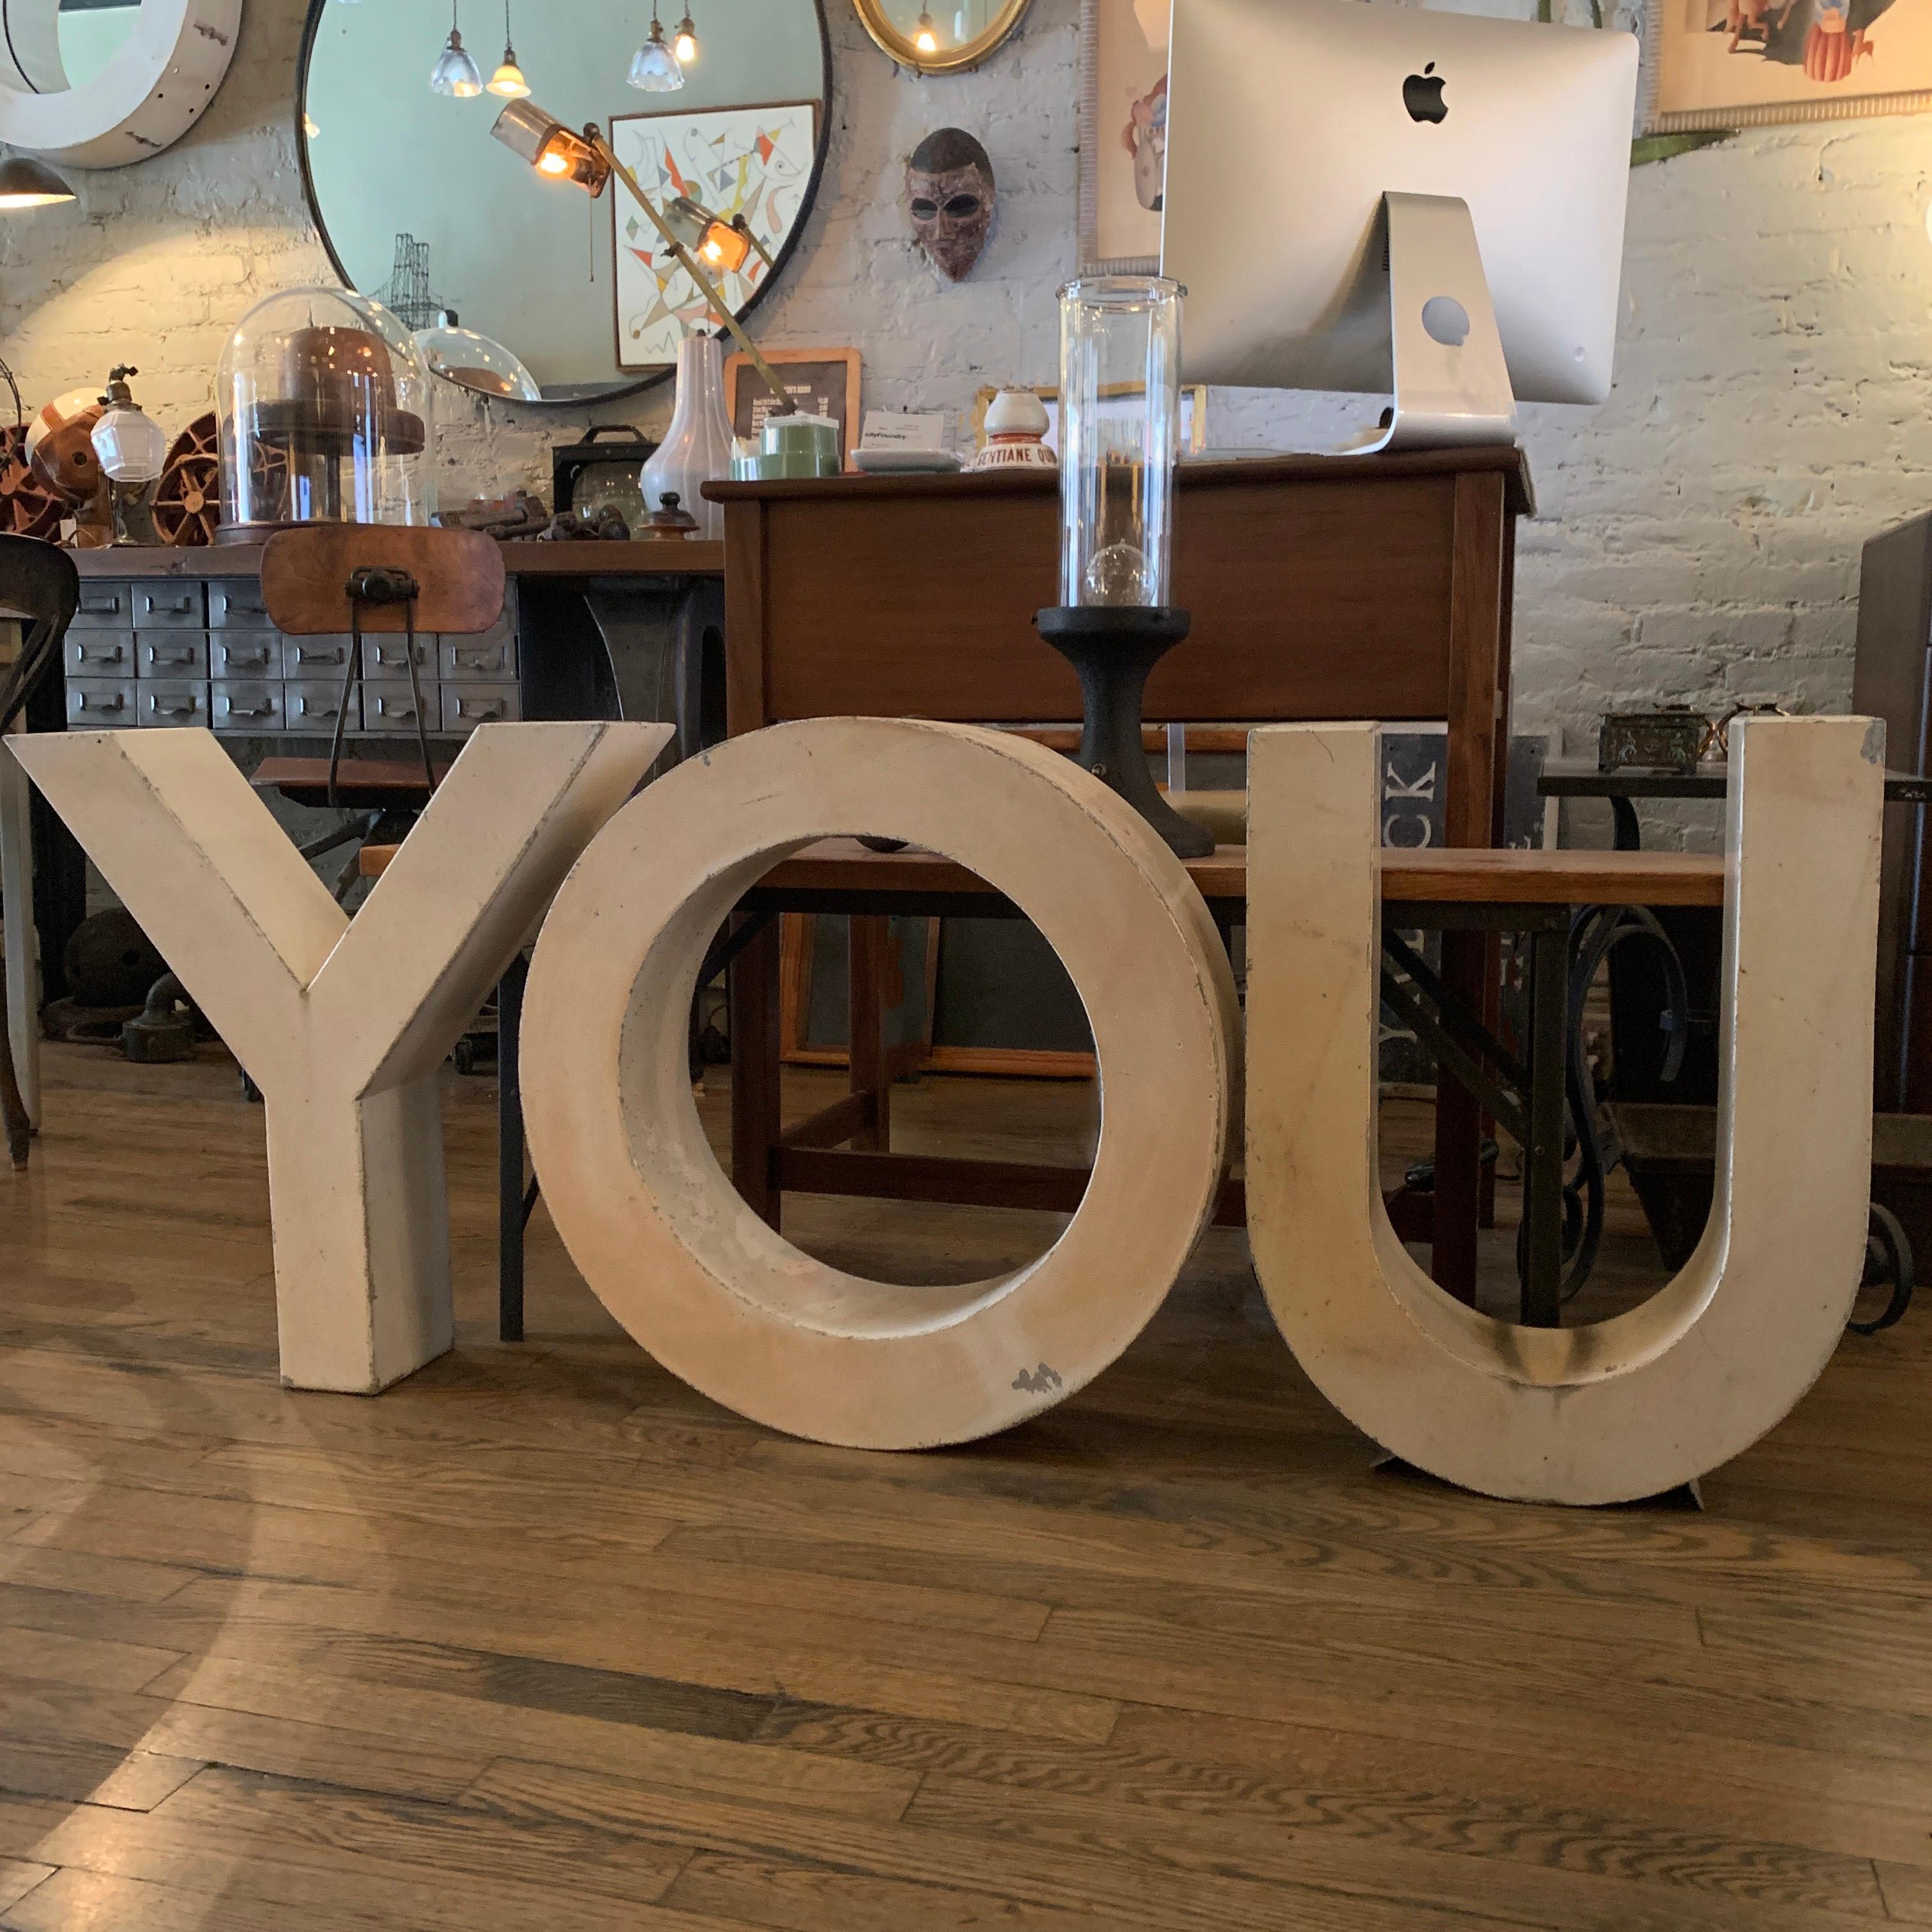 Set of 3, Large, industrial, painted metal, building signage, marquee letters YOU. The width of the letters Y and O is 24 inches and the letter U is 18 inches. Sold together as the word YOU.